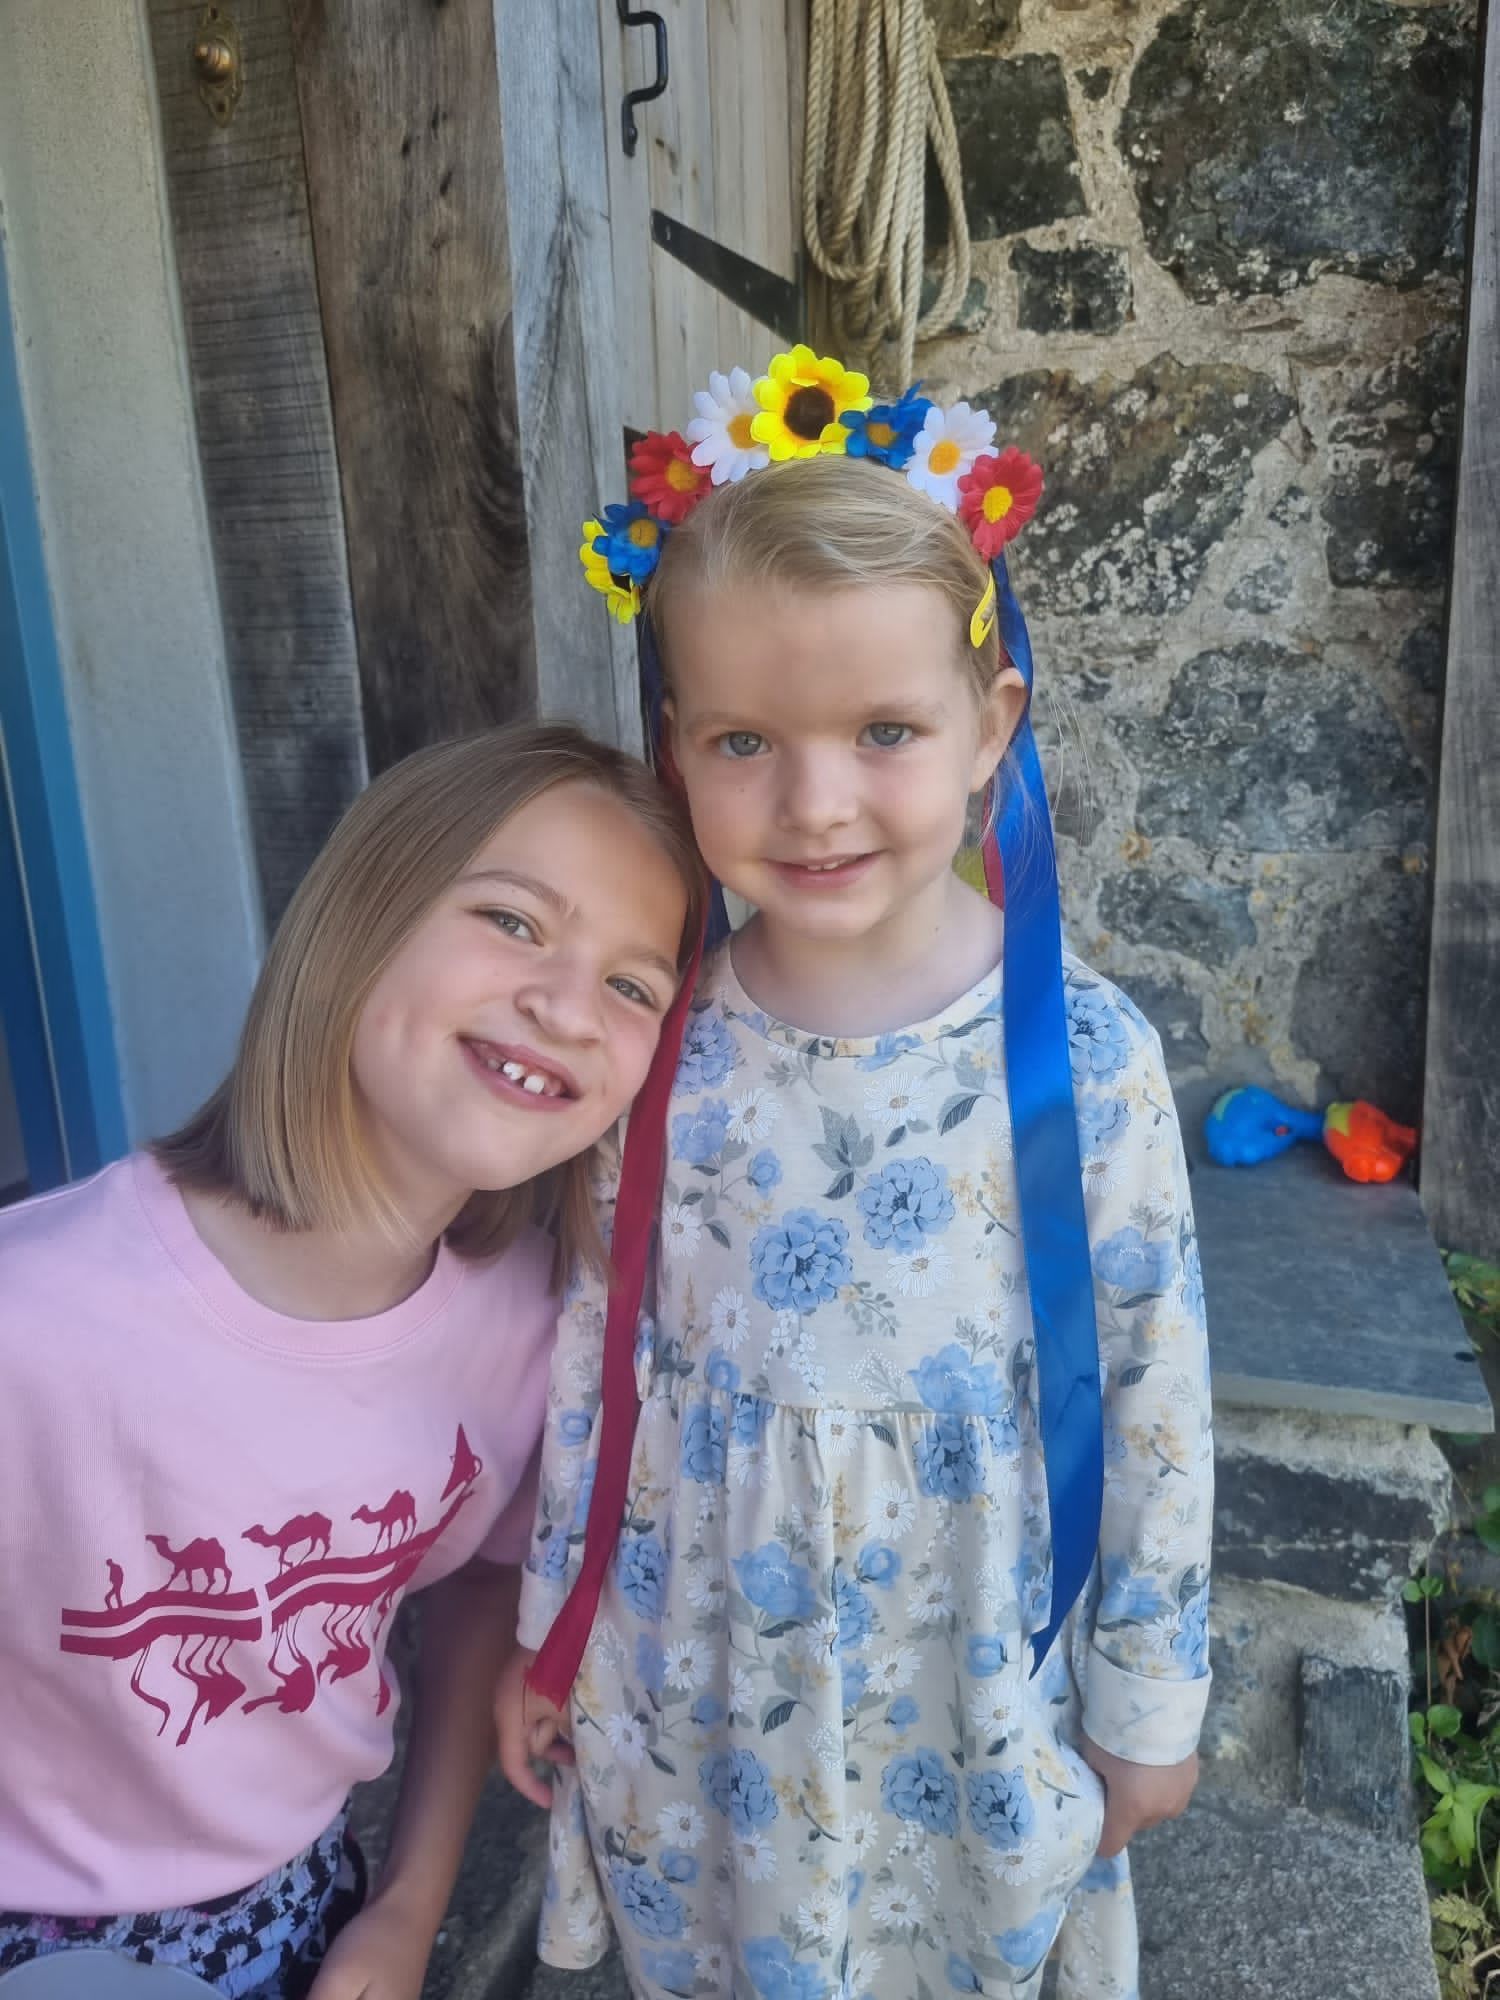 Clover, aged nine, and Pip, four, with the headband they crafted